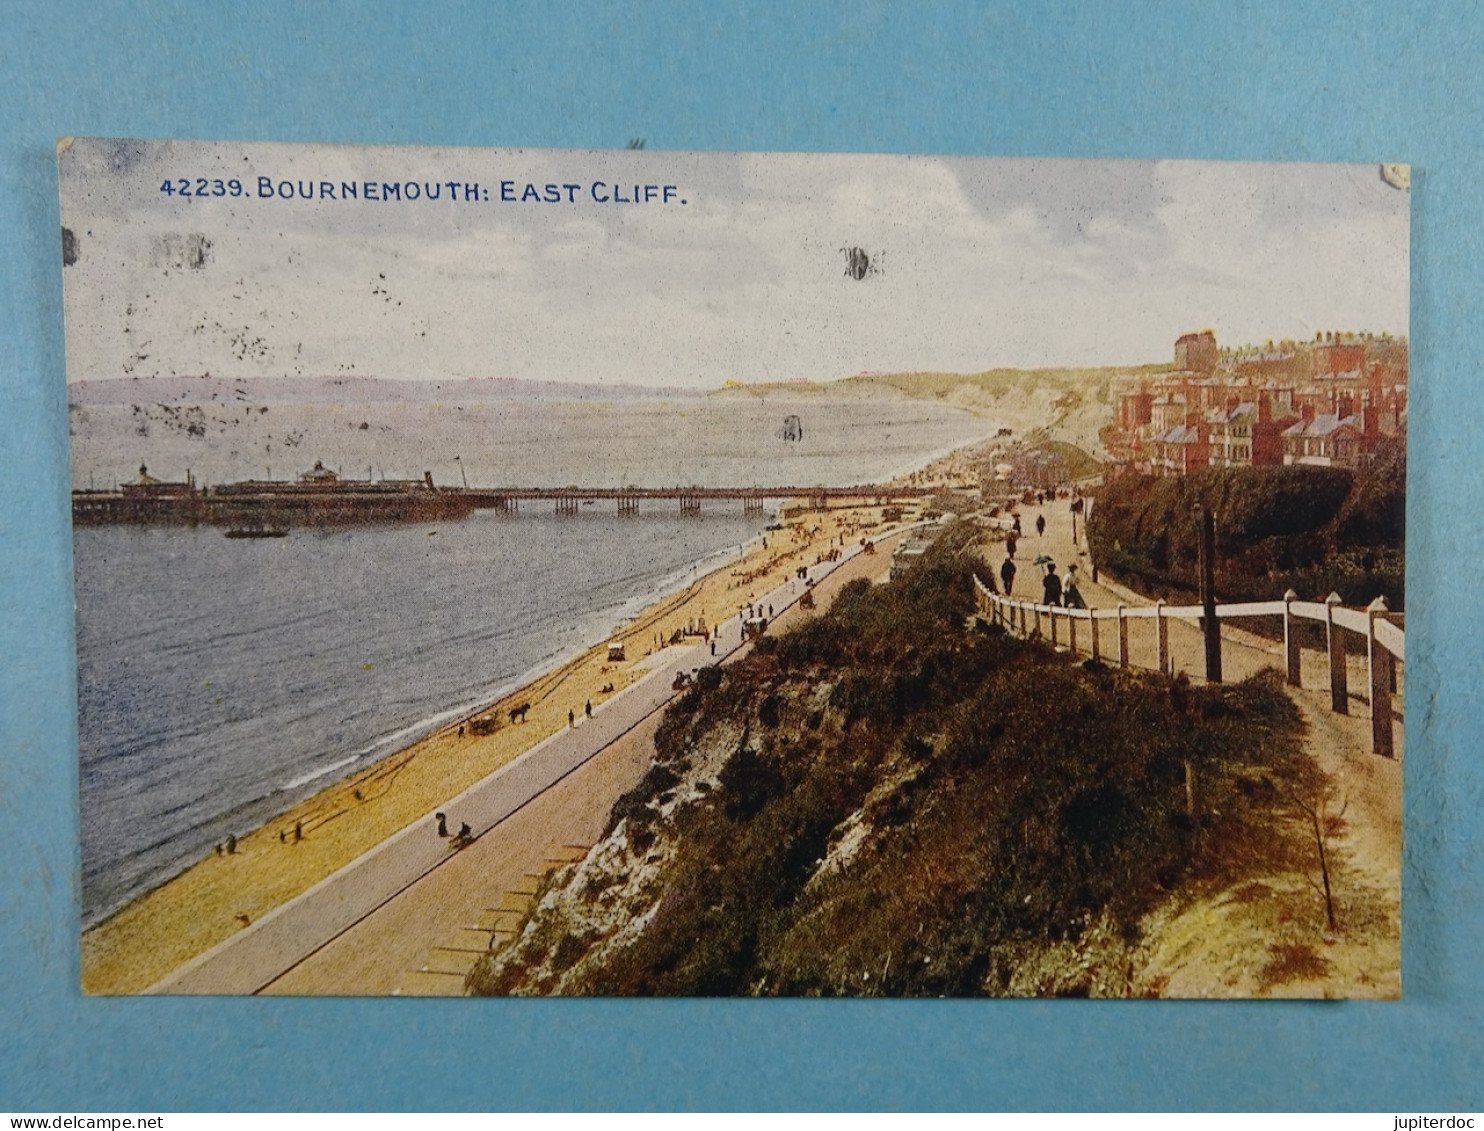 Bournemouth East Cliff - Bournemouth (ab 1972)